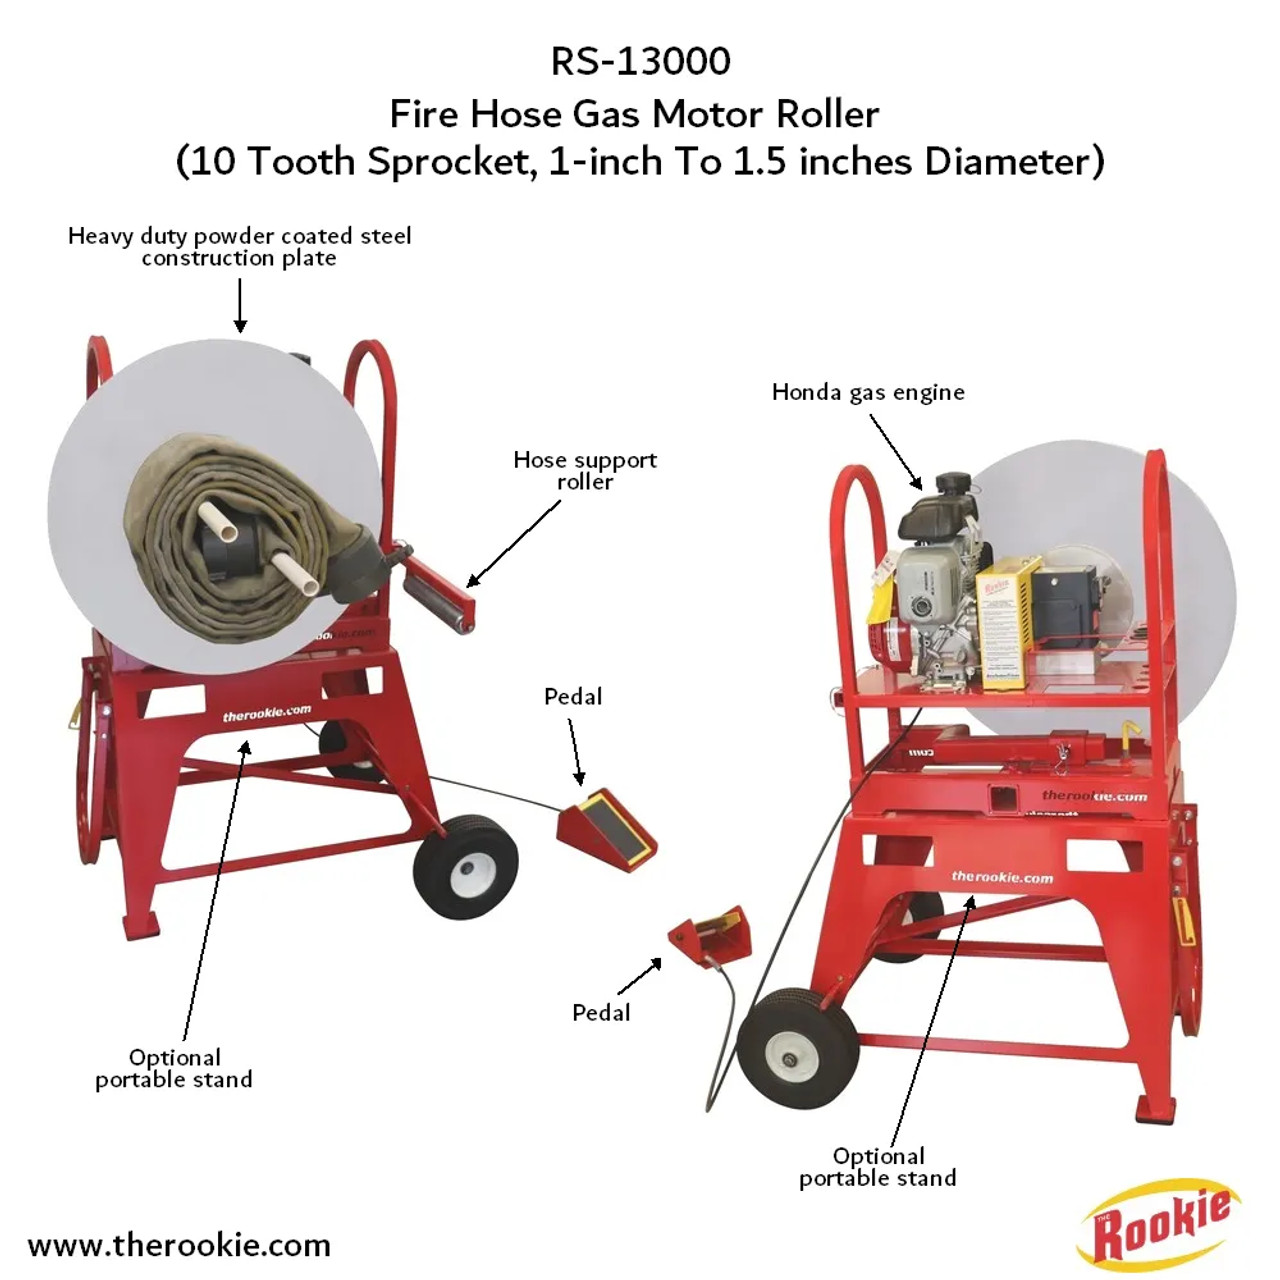 The Rookie Fire Hose Gas Motor Roller (1 to 1.5 inches diameter